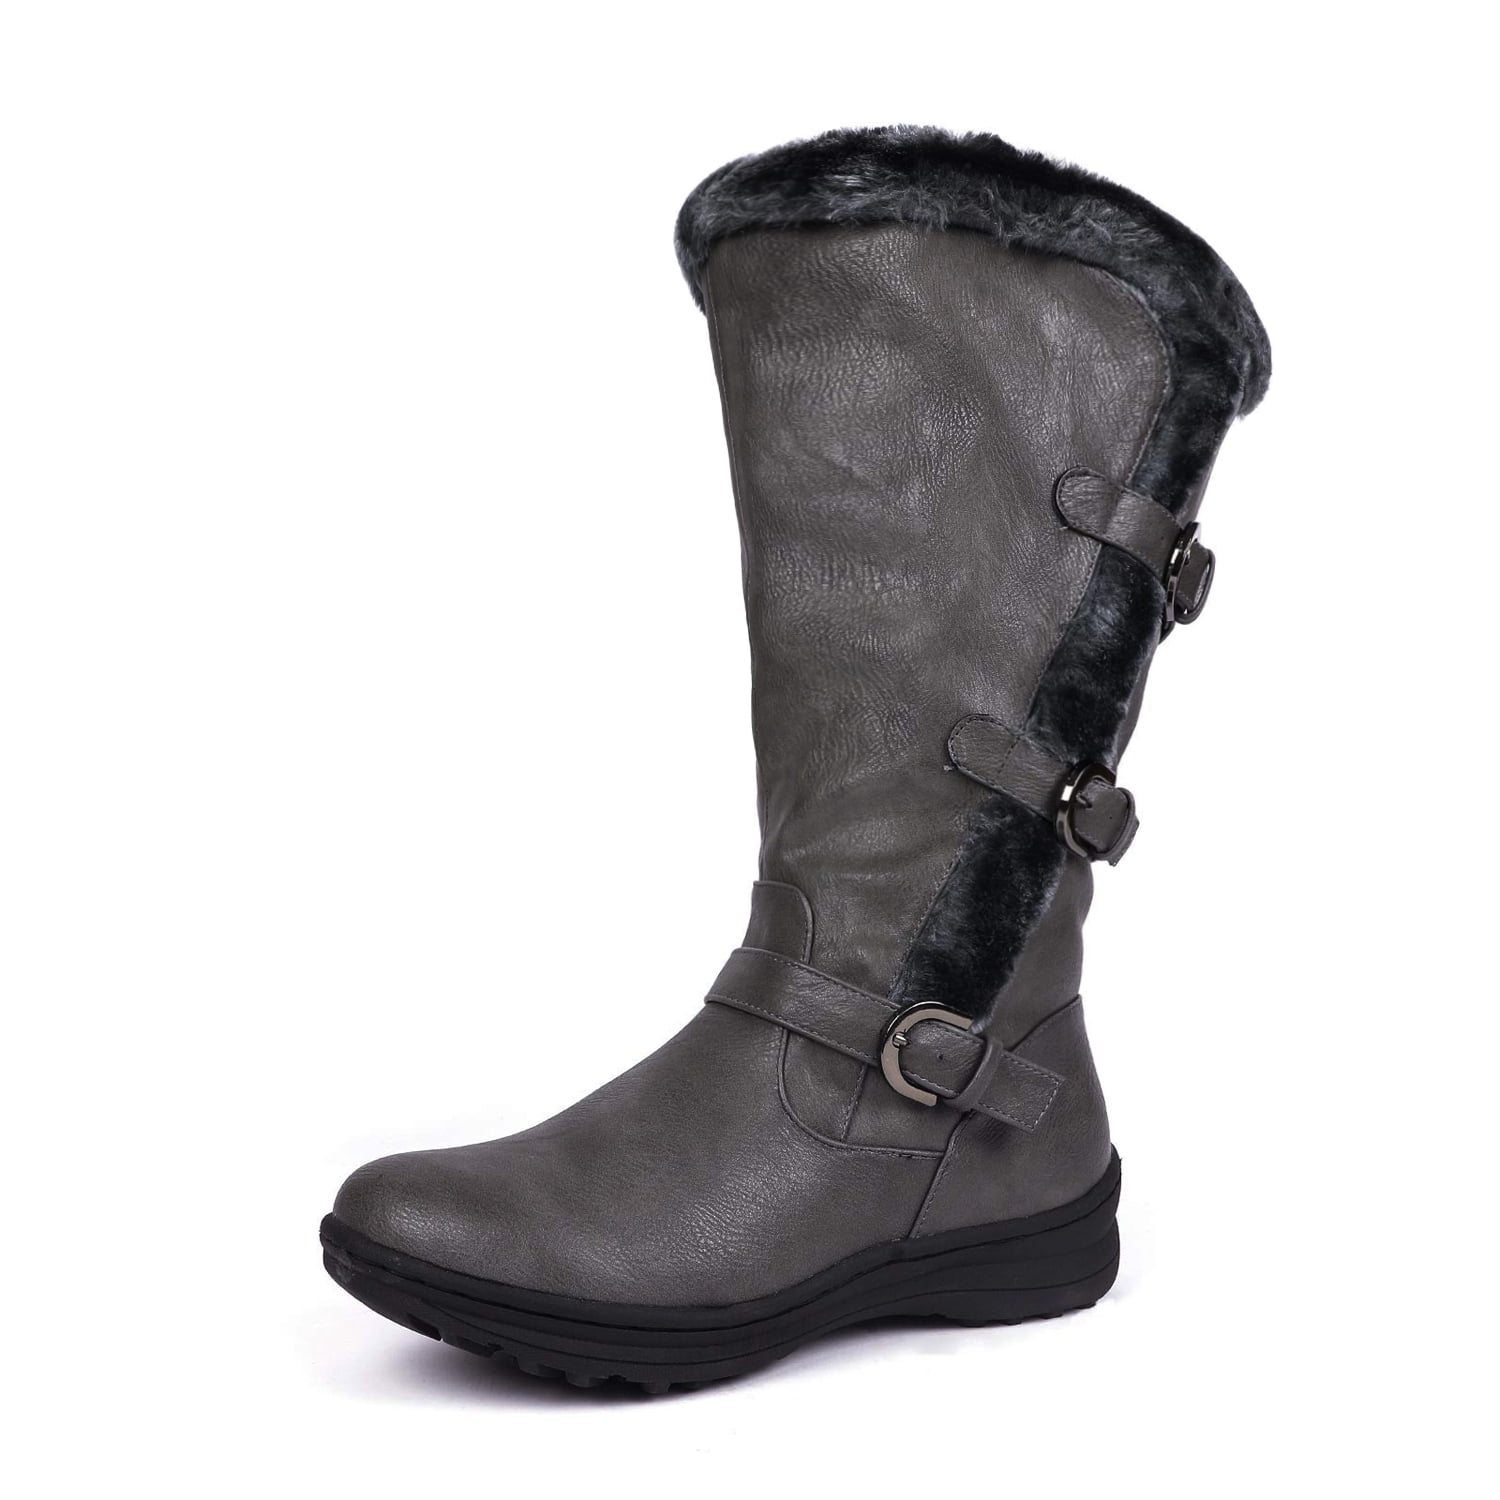 DREAM PAIRS Womens BLVD Knee High Pull On Fall Weather Boots Wide Calf Available